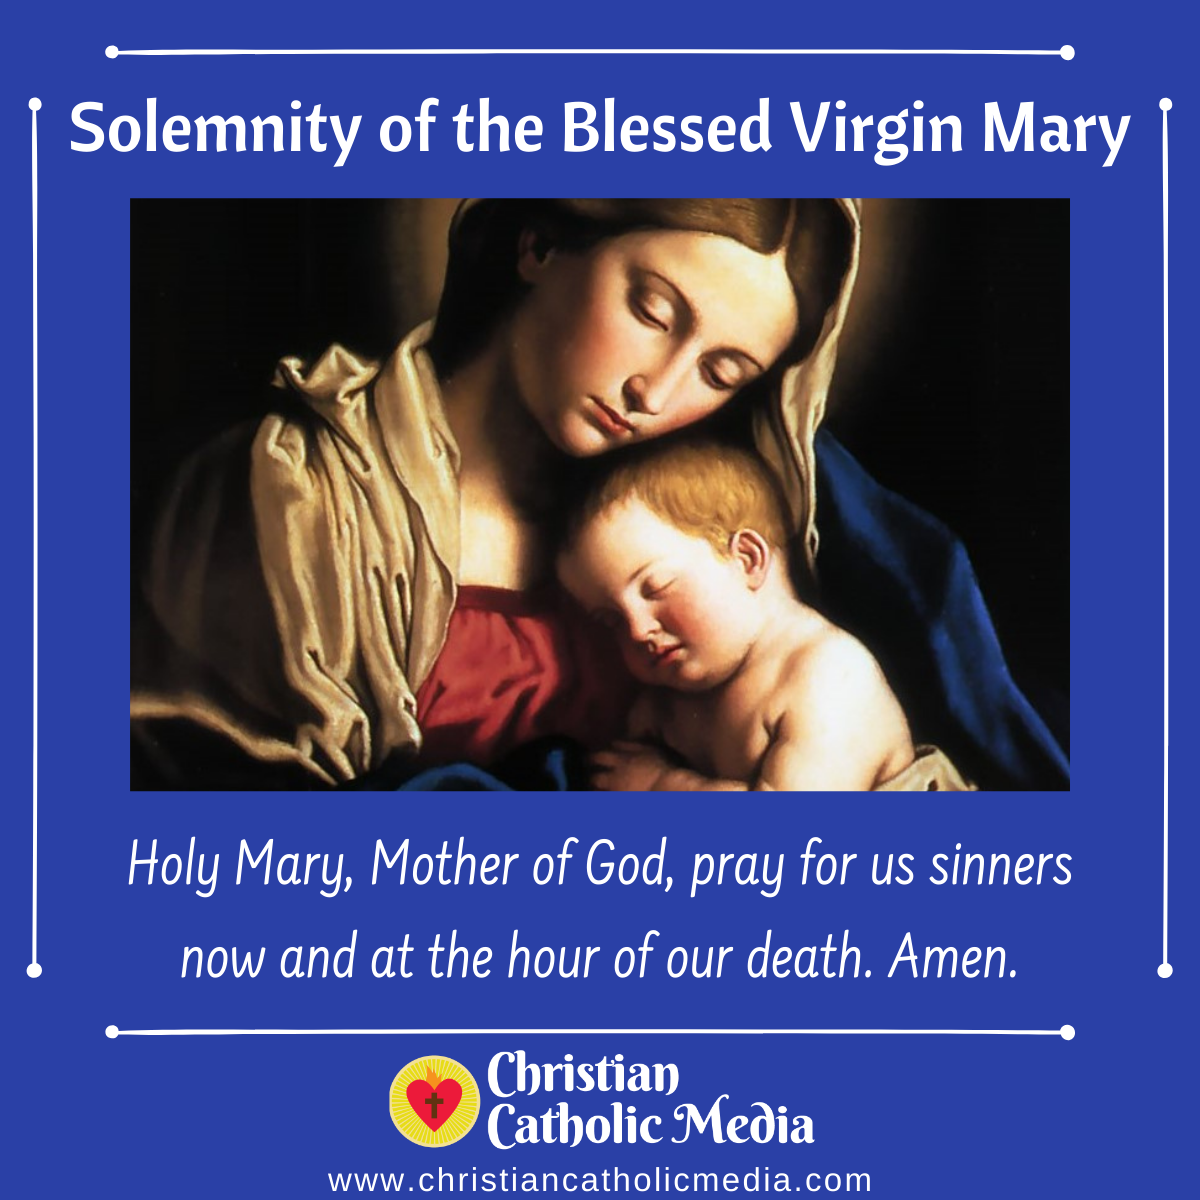 Solemnity of the Blessed Virgin Mary - Saturday January 1, 2022